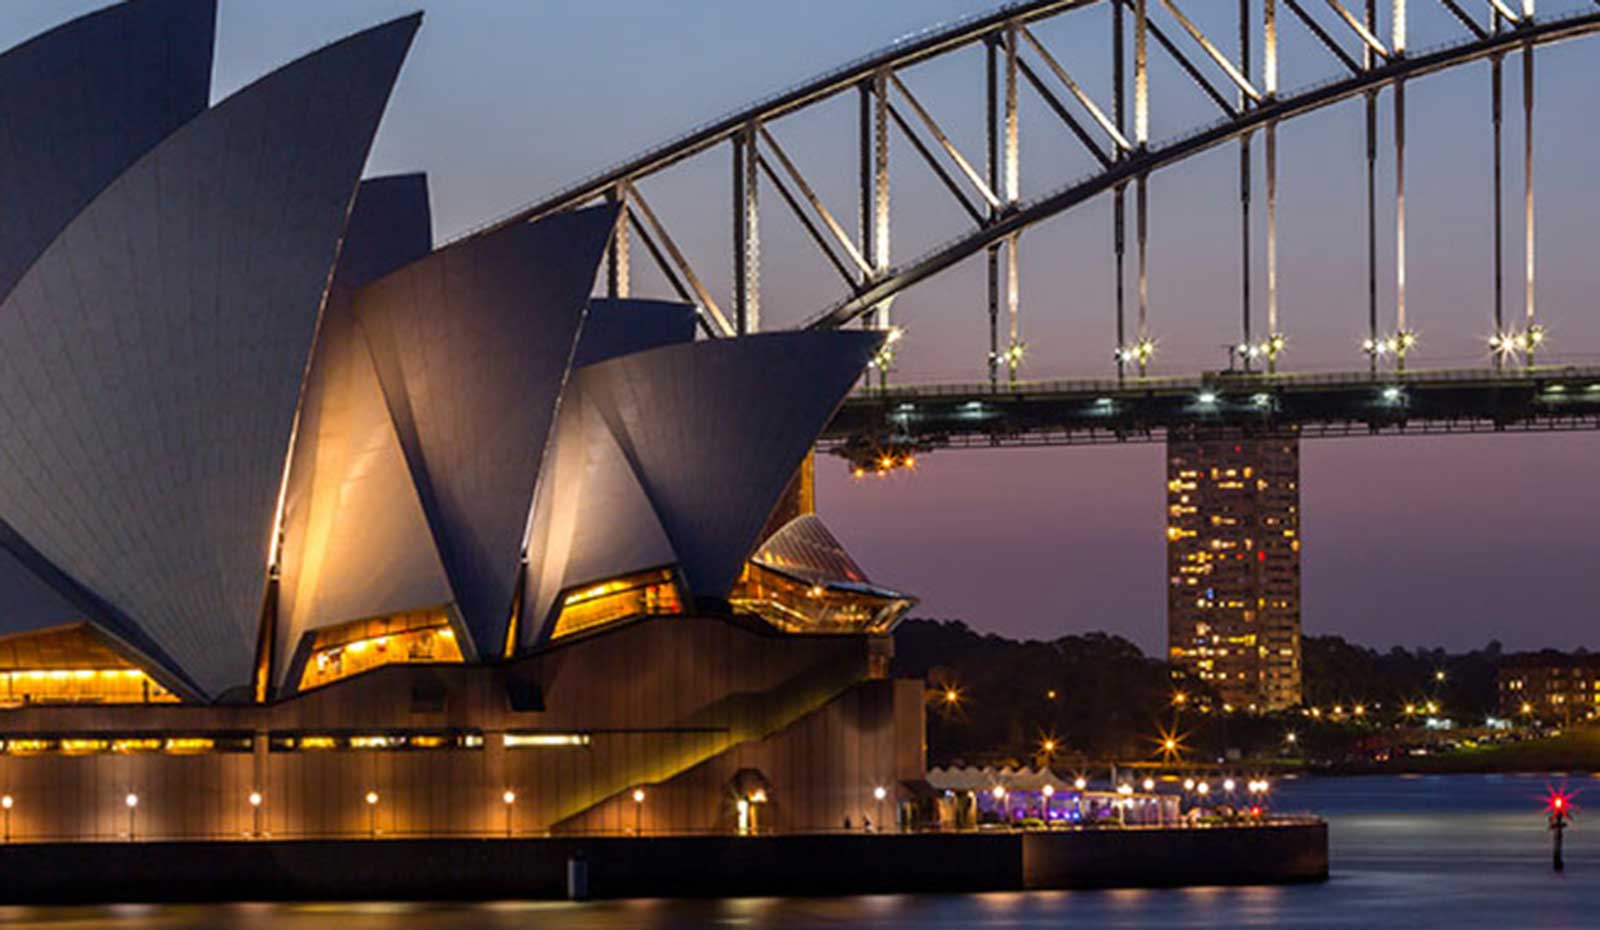 The opera house in Australia, used as an example of the global reach that International Mail Service has.